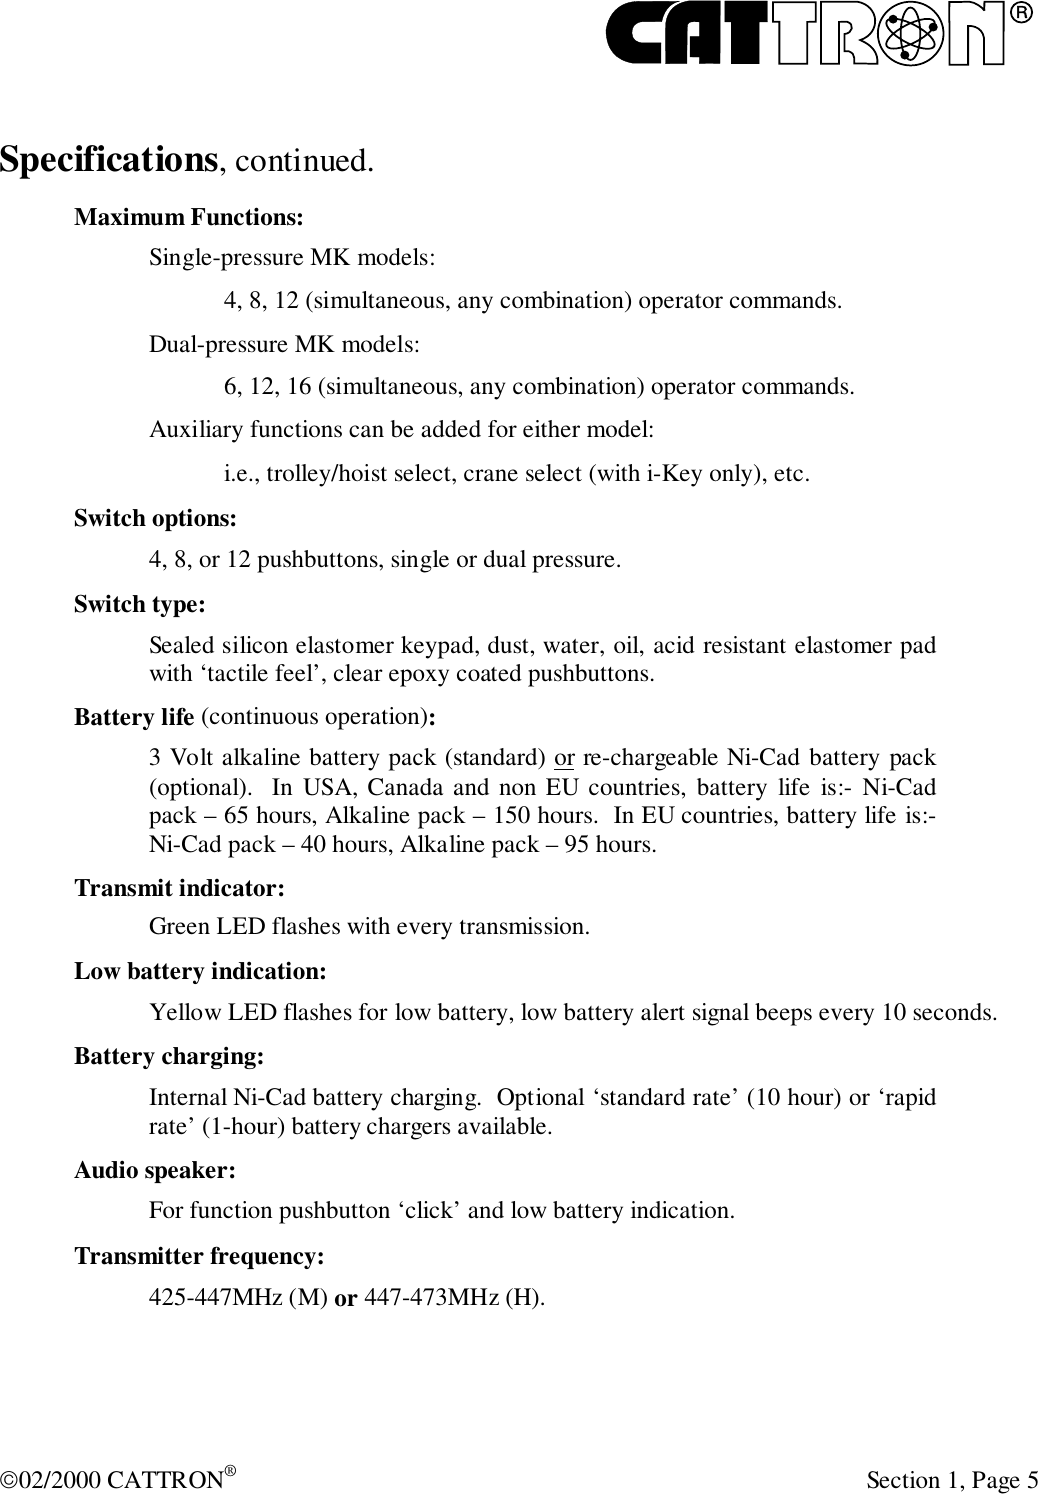 R02/2000 CATTRON® Section 1, Page 5Specifications, continued.Maximum Functions:Single-pressure MK models:4, 8, 12 (simultaneous, any combination) operator commands.Dual-pressure MK models:6, 12, 16 (simultaneous, any combination) operator commands.Auxiliary functions can be added for either model:i.e., trolley/hoist select, crane select (with i-Key only), etc.Switch options:4, 8, or 12 pushbuttons, single or dual pressure.Switch type:Sealed silicon elastomer keypad, dust, water, oil, acid resistant elastomer padwith ‘tactile feel’, clear epoxy coated pushbuttons.Battery life (continuous operation):3 Volt alkaline battery pack (standard) or re-chargeable Ni-Cad battery pack(optional).  In USA, Canada and non EU countries, battery life is:- Ni-Cadpack – 65 hours, Alkaline pack – 150 hours.  In EU countries, battery life is:-Ni-Cad pack – 40 hours, Alkaline pack – 95 hours.Transmit indicator:Green LED flashes with every transmission.Low battery indication:Yellow LED flashes for low battery, low battery alert signal beeps every 10 seconds.Battery charging:Internal Ni-Cad battery charging.  Optional ‘standard rate’ (10 hour) or ‘rapidrate’ (1-hour) battery chargers available.Audio speaker:For function pushbutton ‘click’ and low battery indication.Transmitter frequency:425-447MHz (M) or 447-473MHz (H).